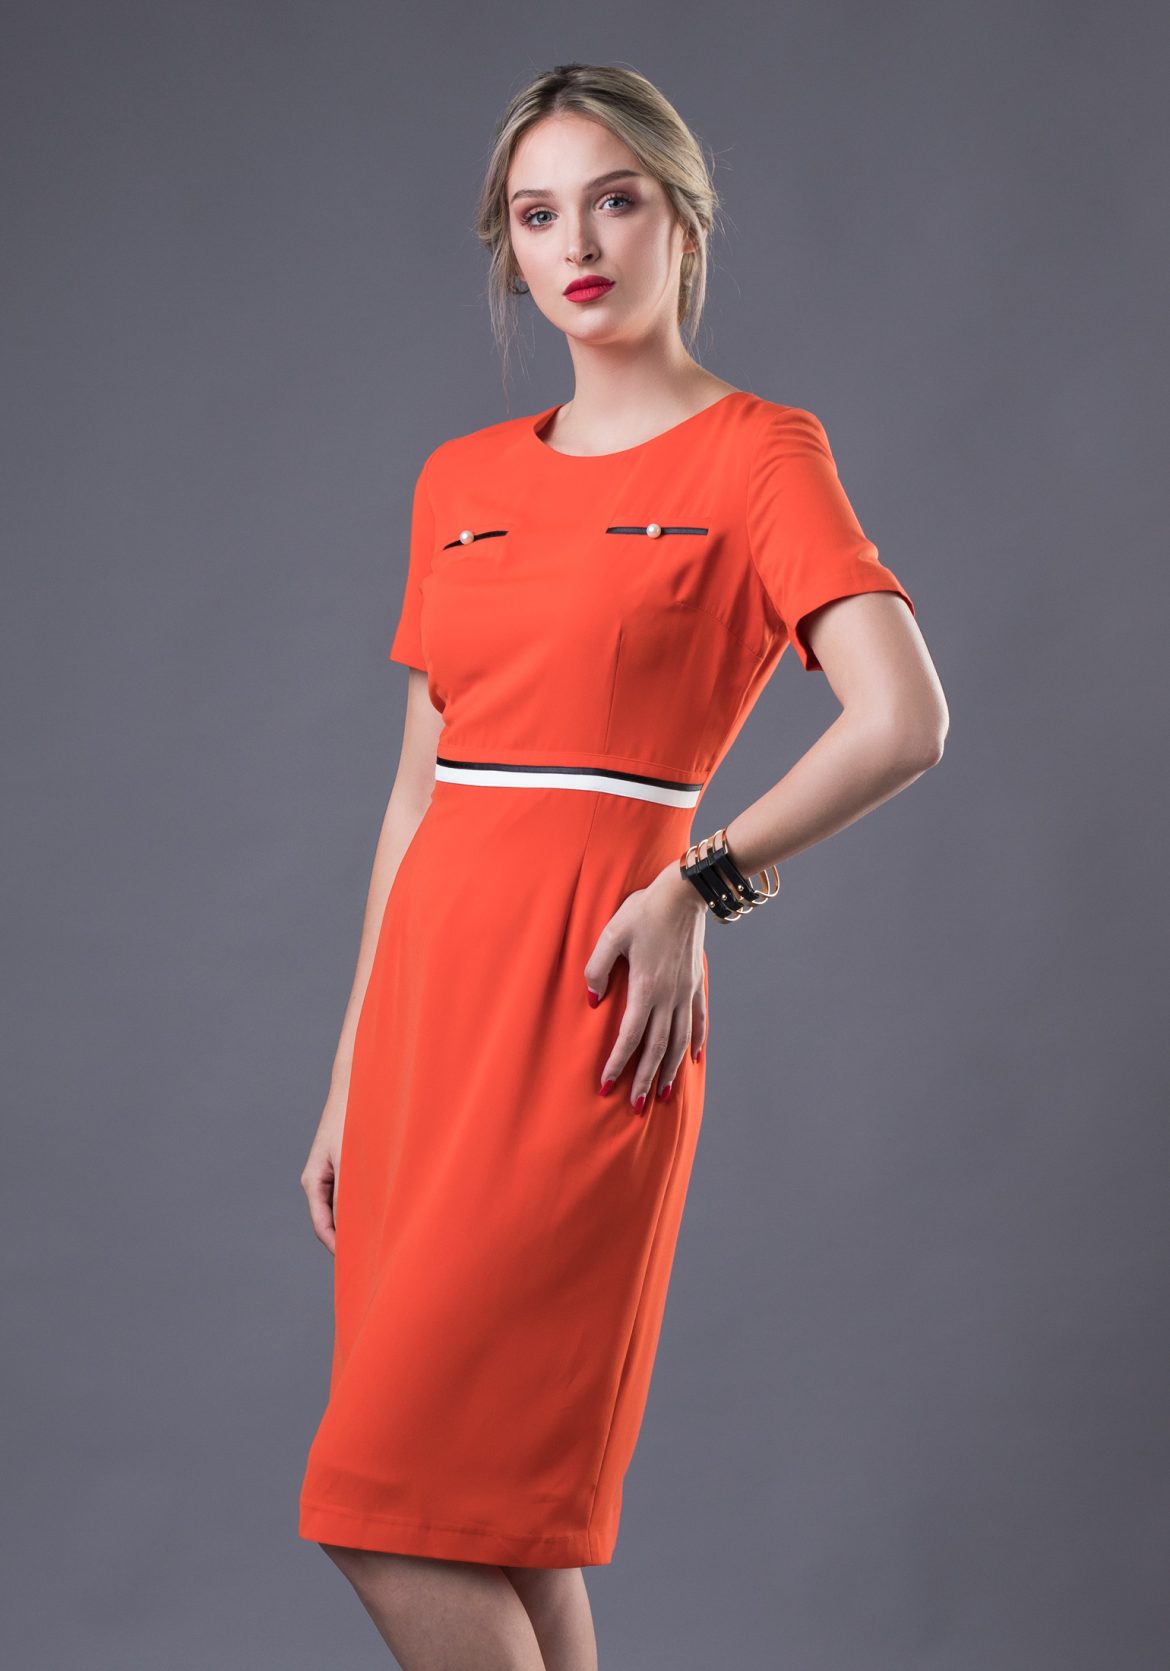 ORANGE DRESS IS A MUST HAVE THIS FALL